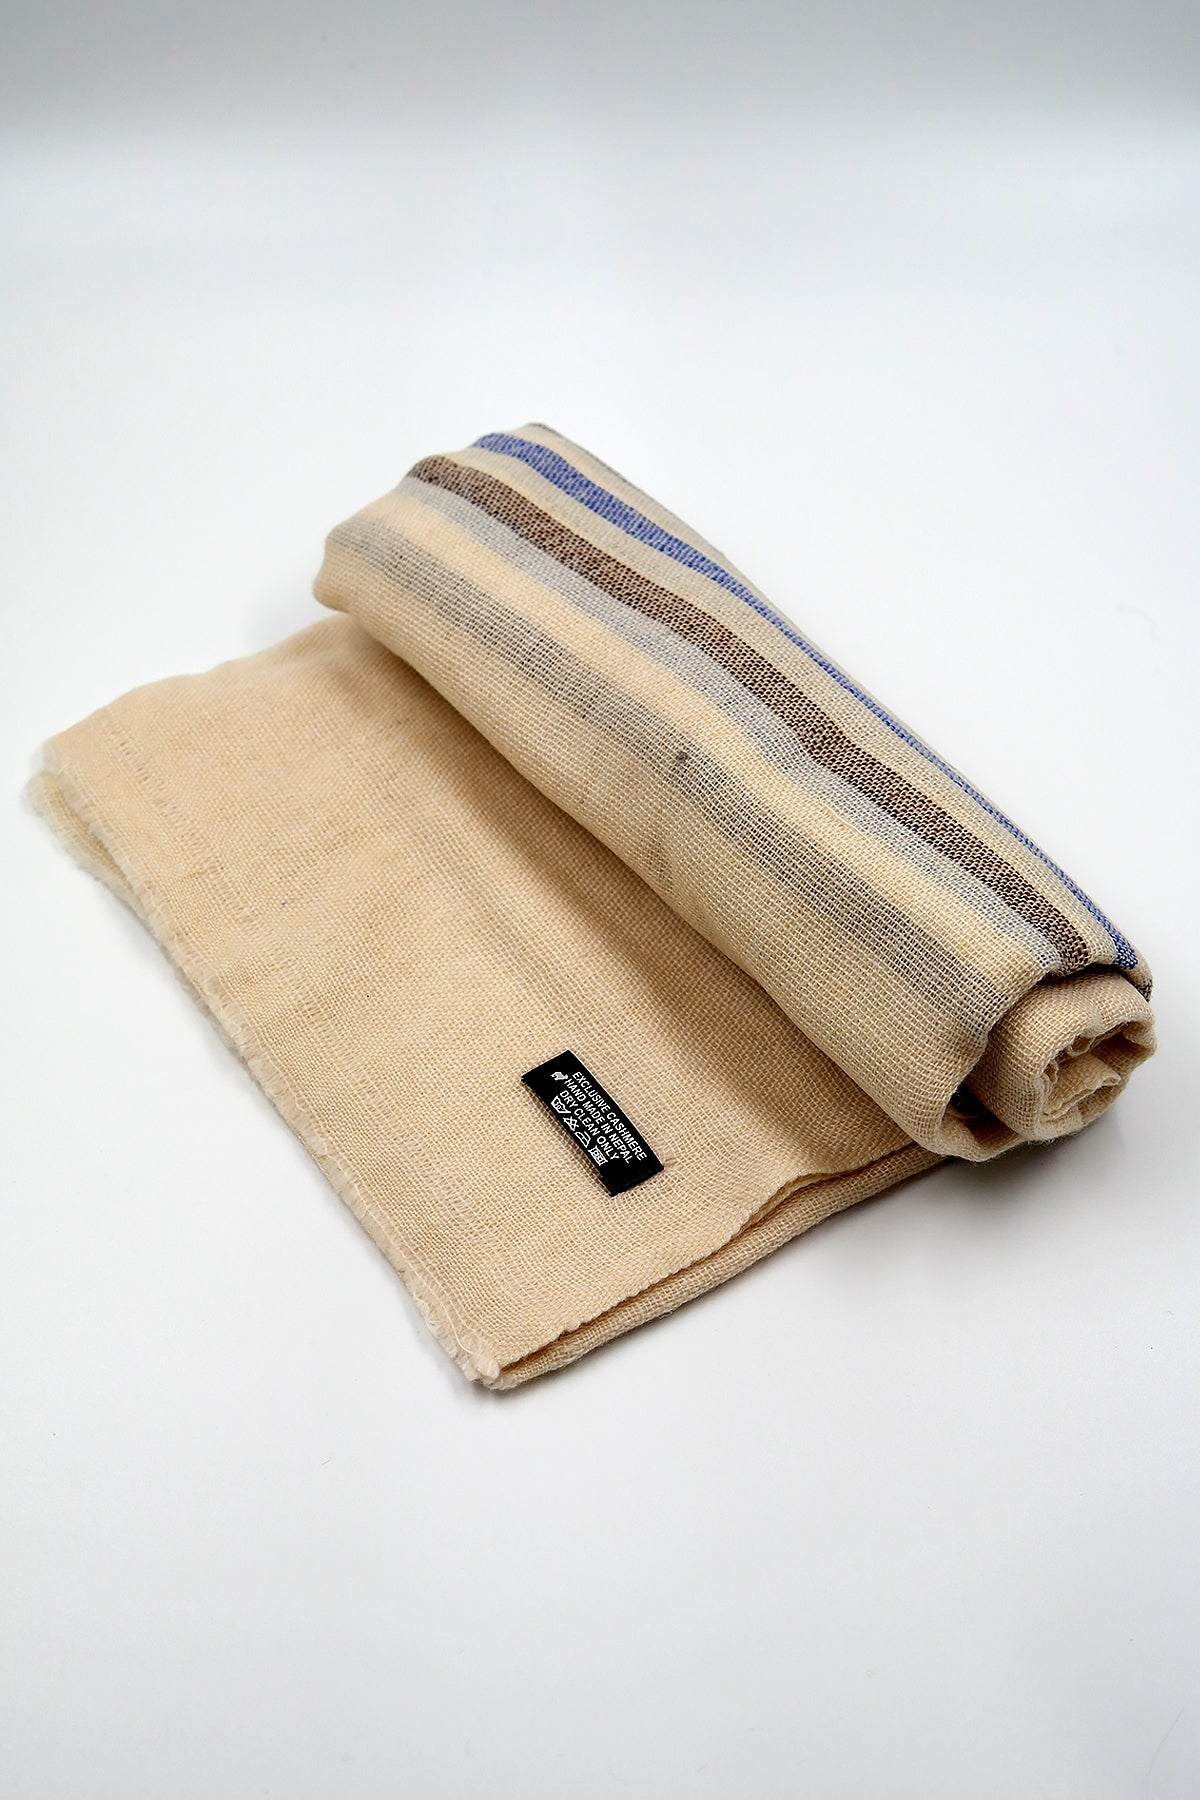 Cozy and Comfortable Cashmere Pashmina Shawls